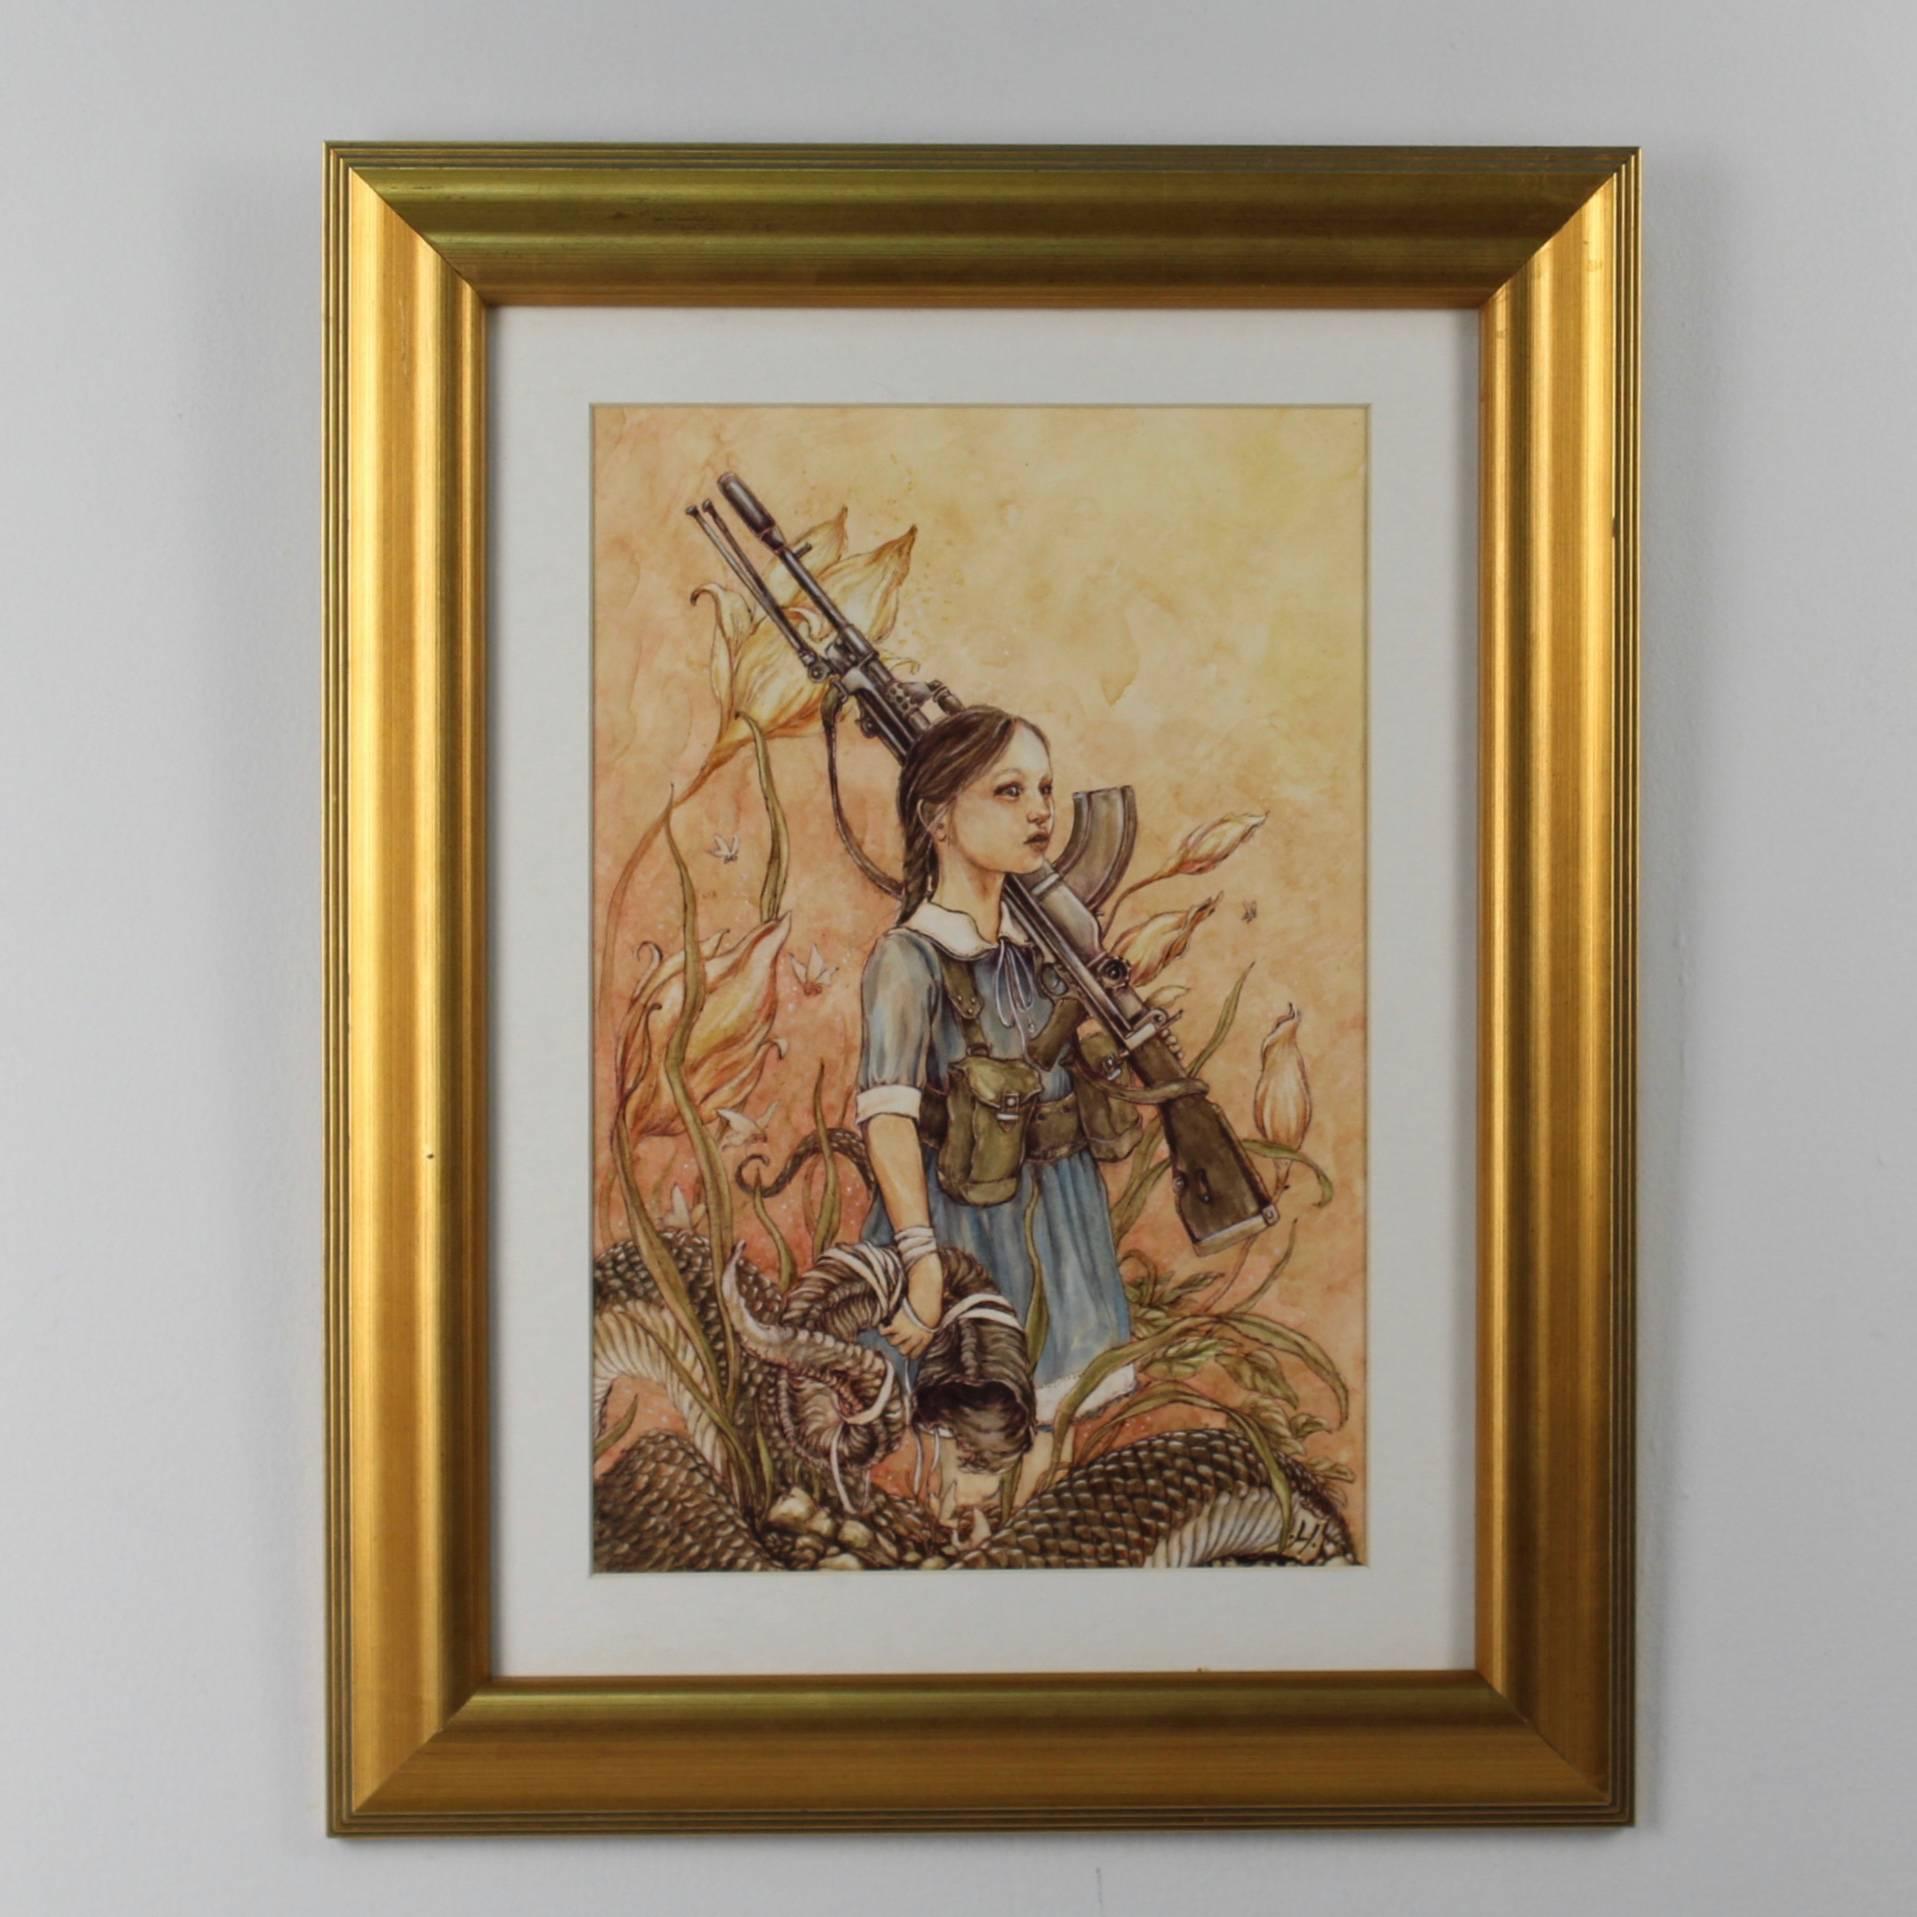 Front line of the Glando-Angelinnian War (Henry Darger theme).

A biro, watercolor, gouache painting. 

Sight size, circa 7 in. x 10 in.
Frame size, circa 12 in. x 15 in. 

Signed with initial lower right.

Jeremy Hush, a long time Punk and